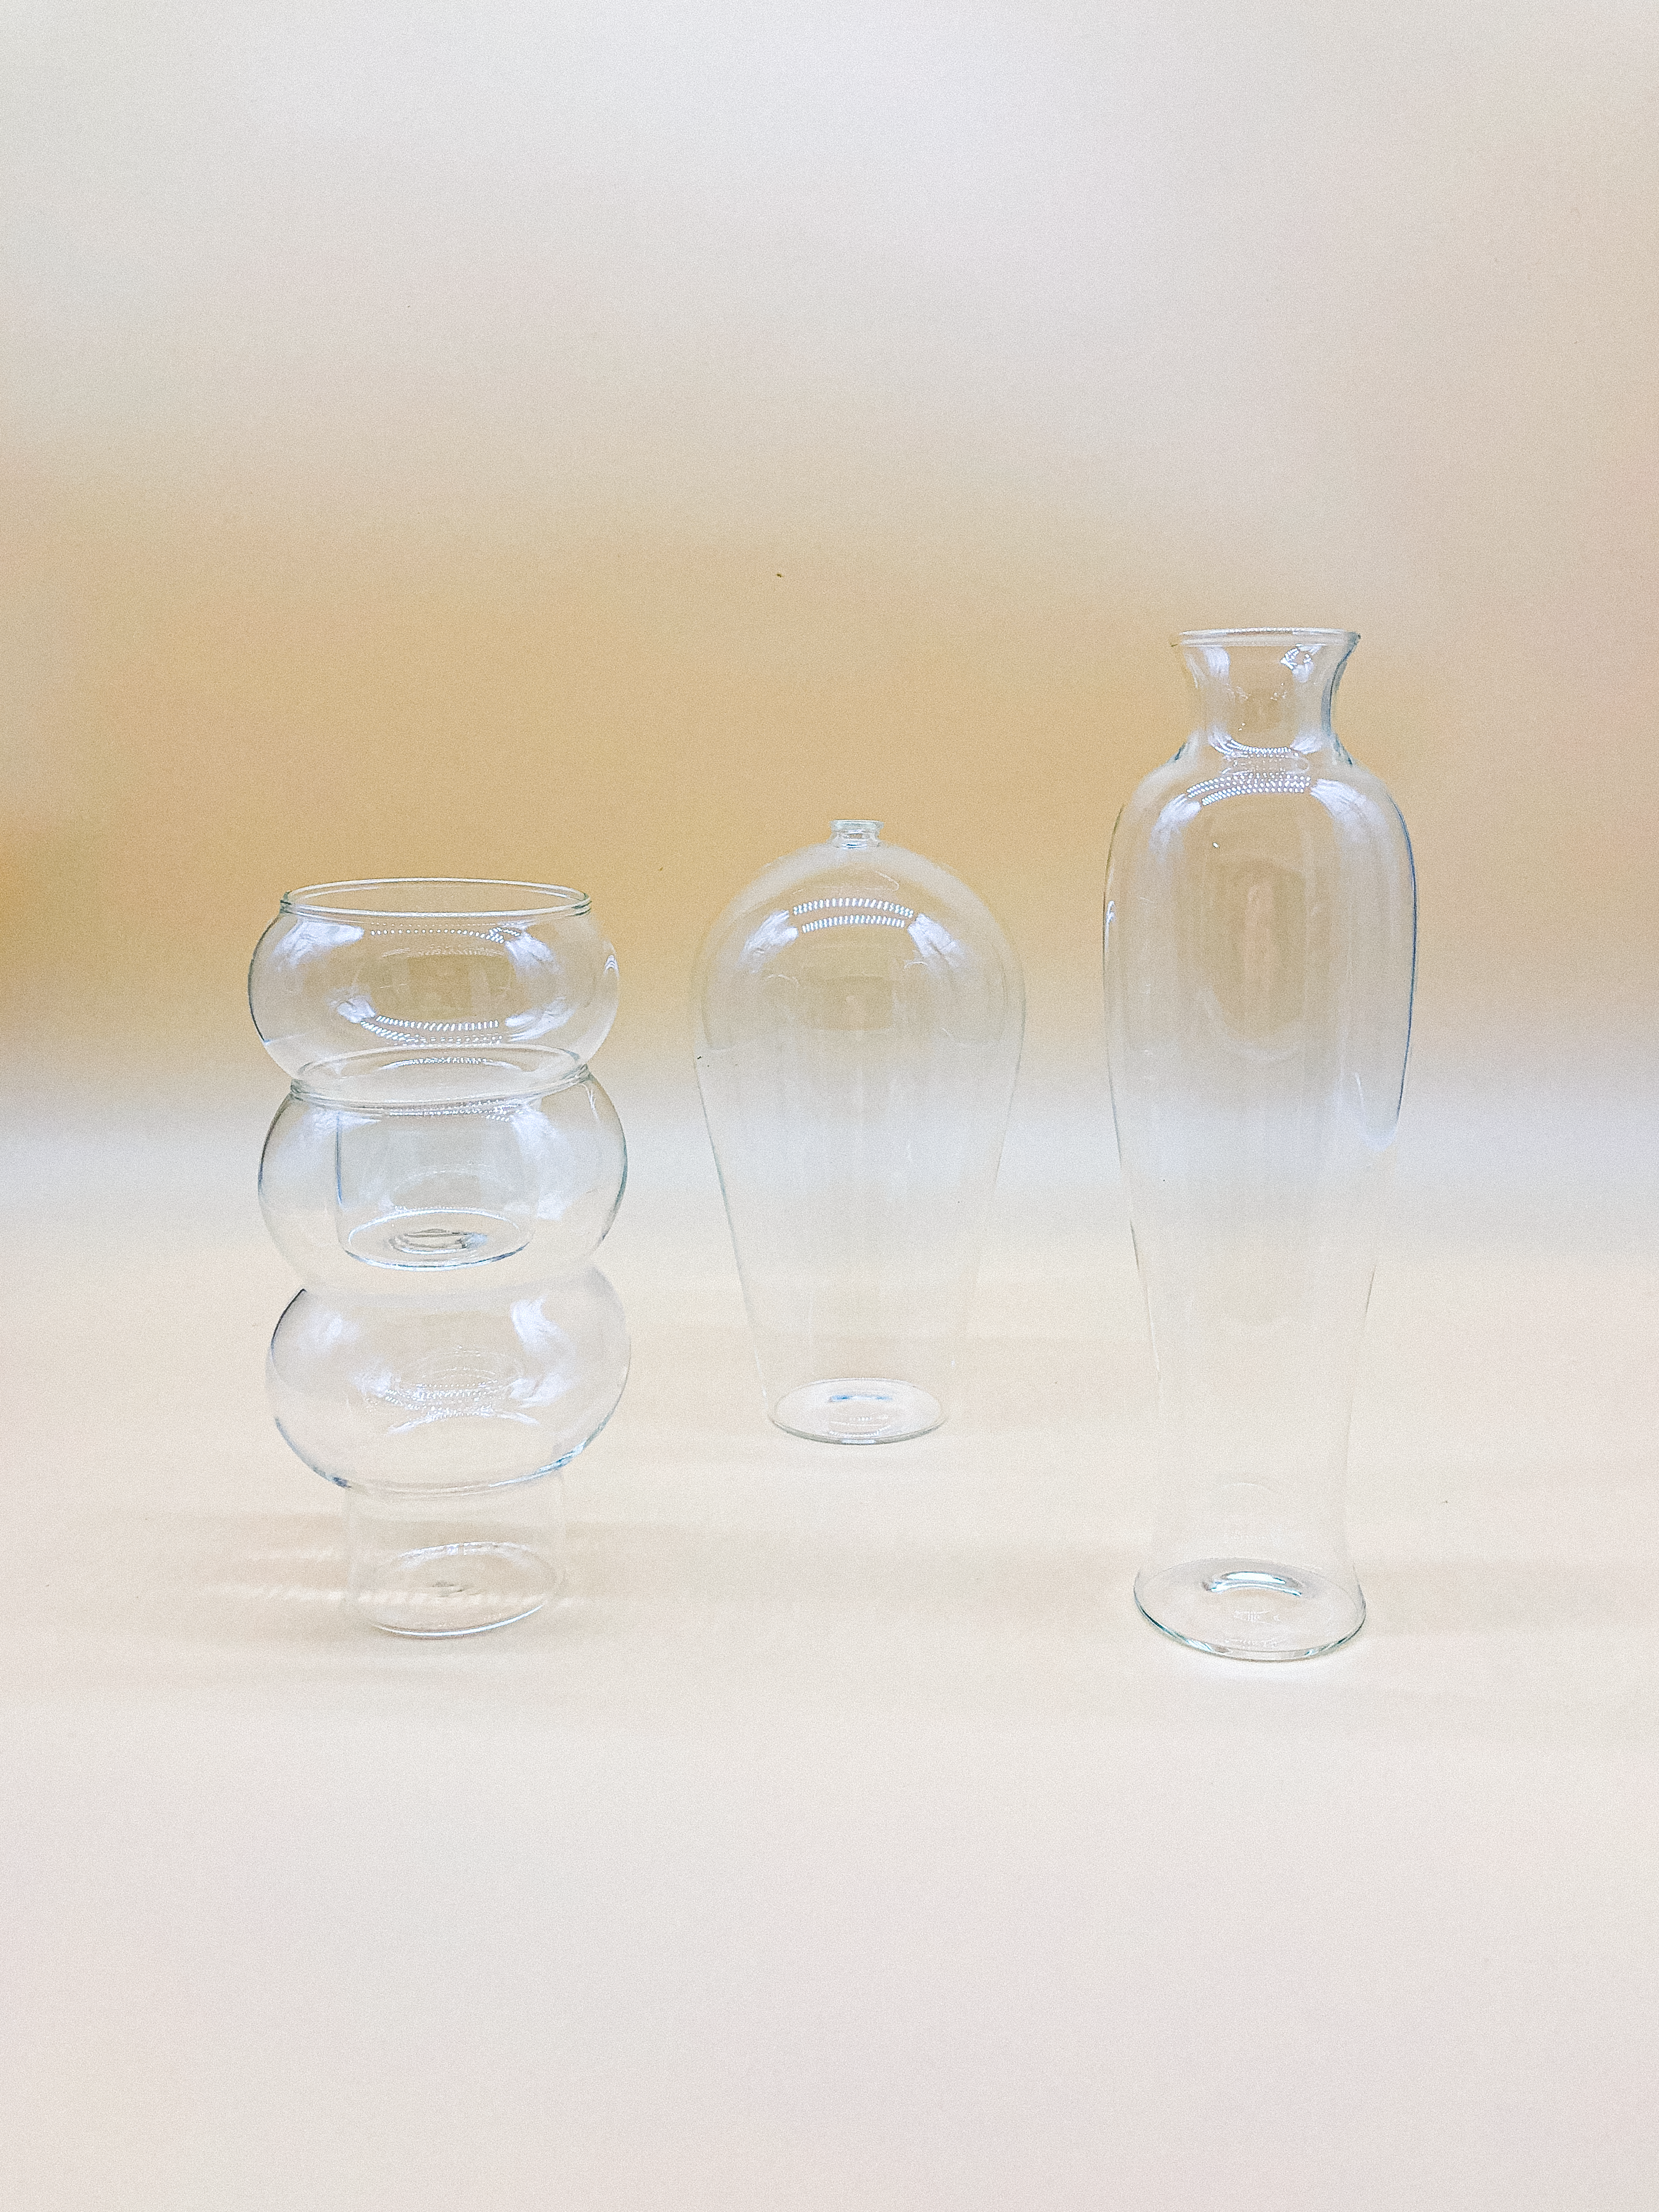 The Simple Vase (Bouquet) by PROSE Botanical